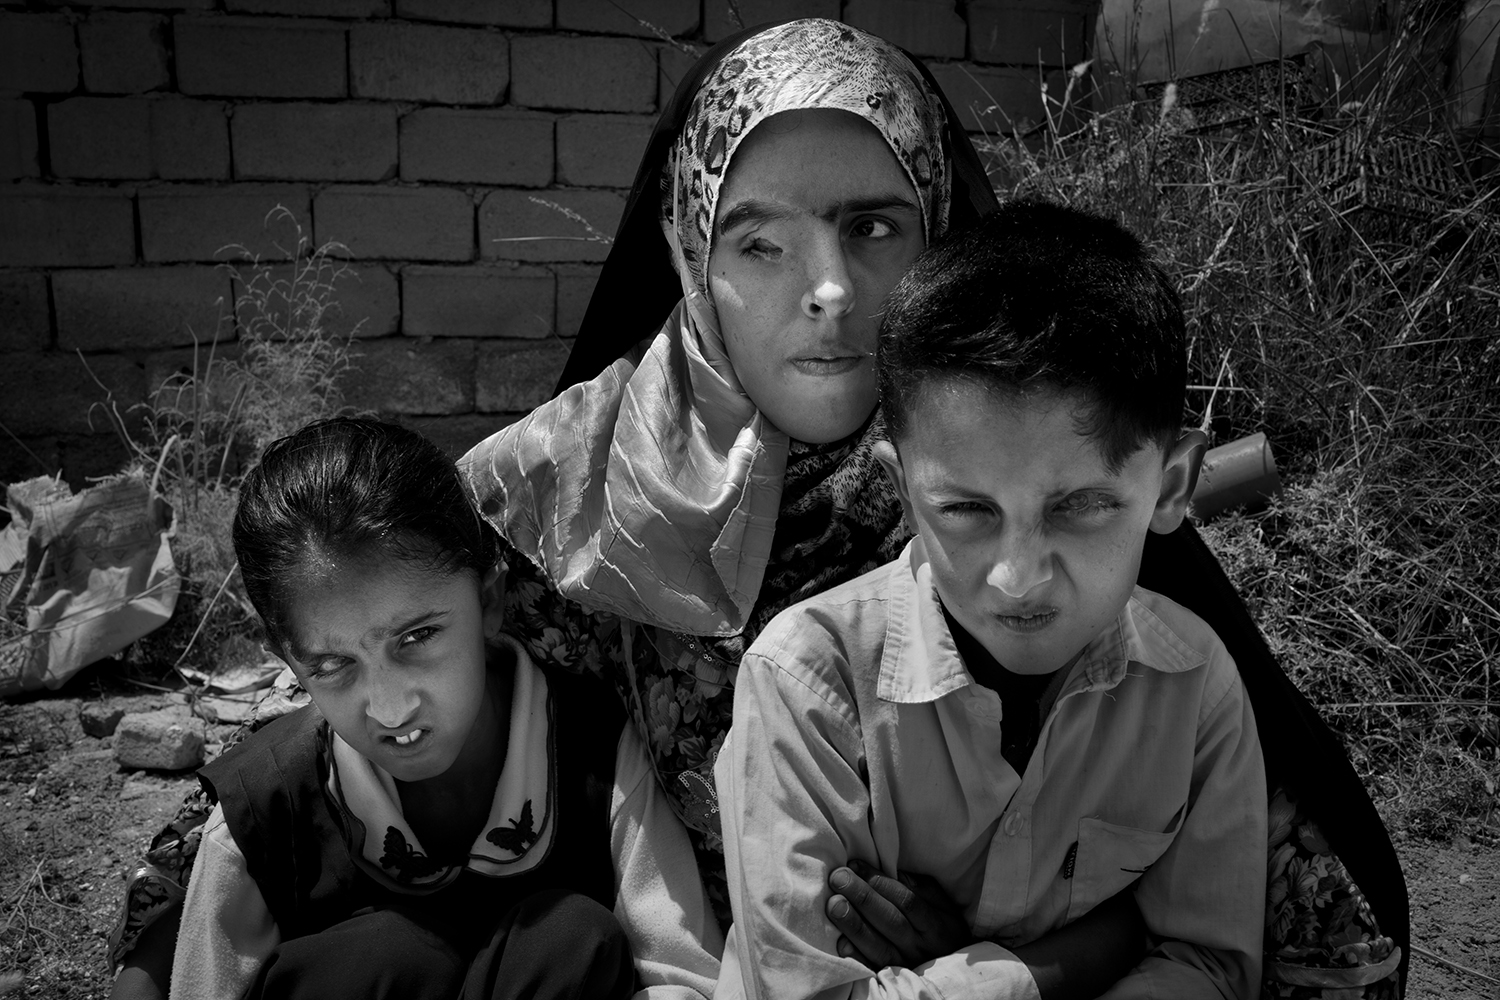 Oct. 24, 2012. Basra. Three members of one family, all of whom were were born with an eye mutation, sit for a portrait.